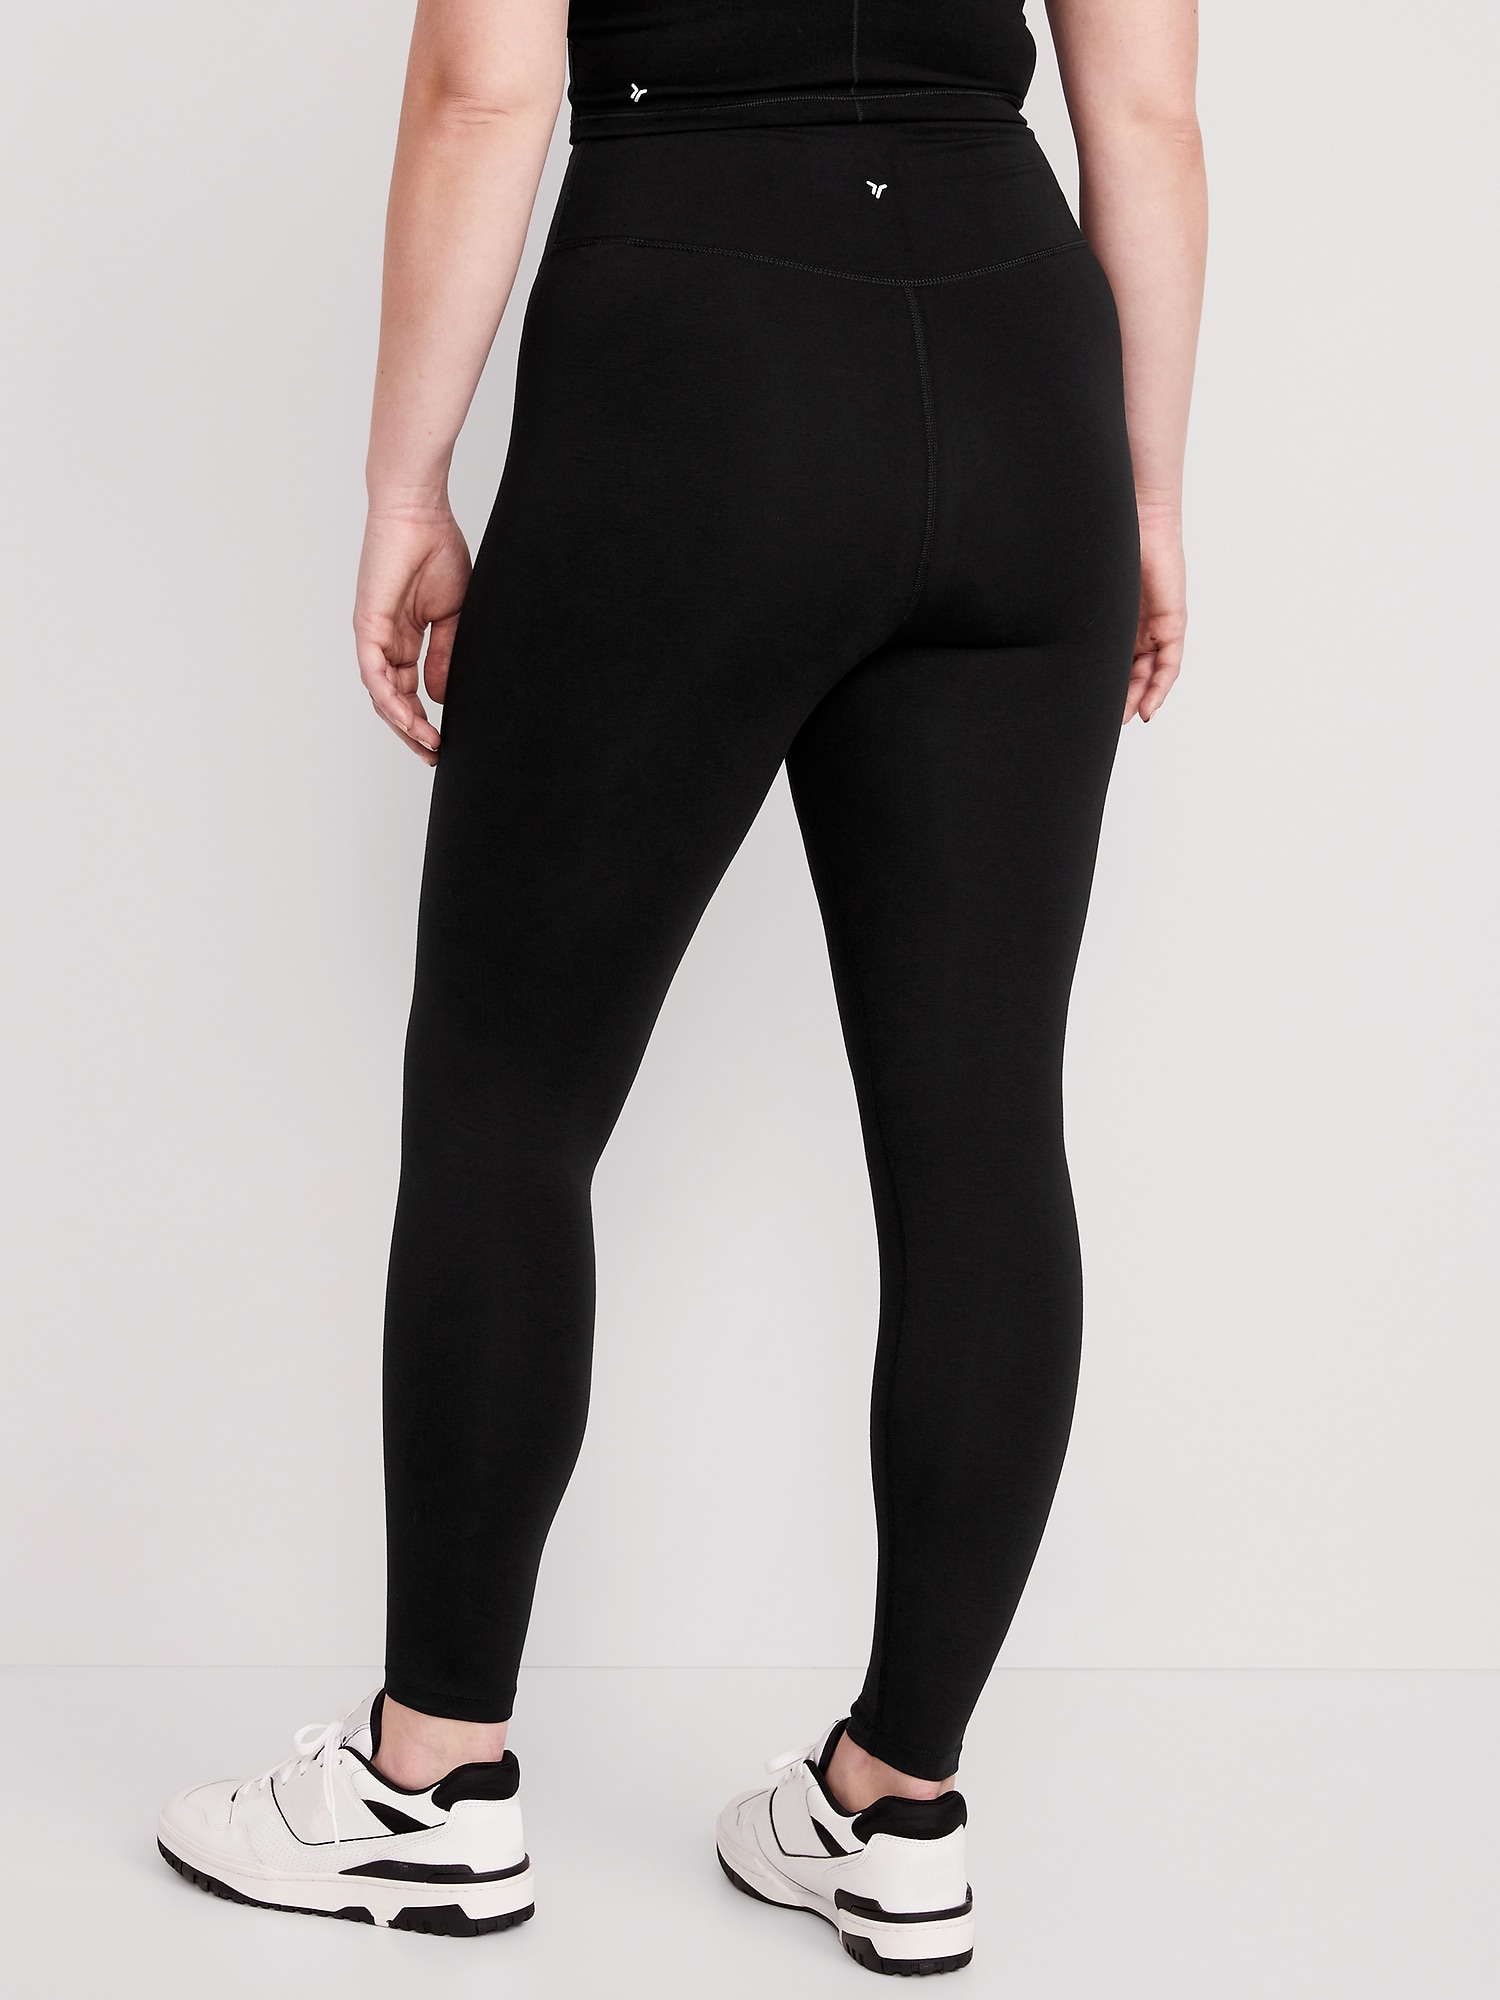 Extra High-Waisted PowerSoft Cropped Leggings 2-Pack